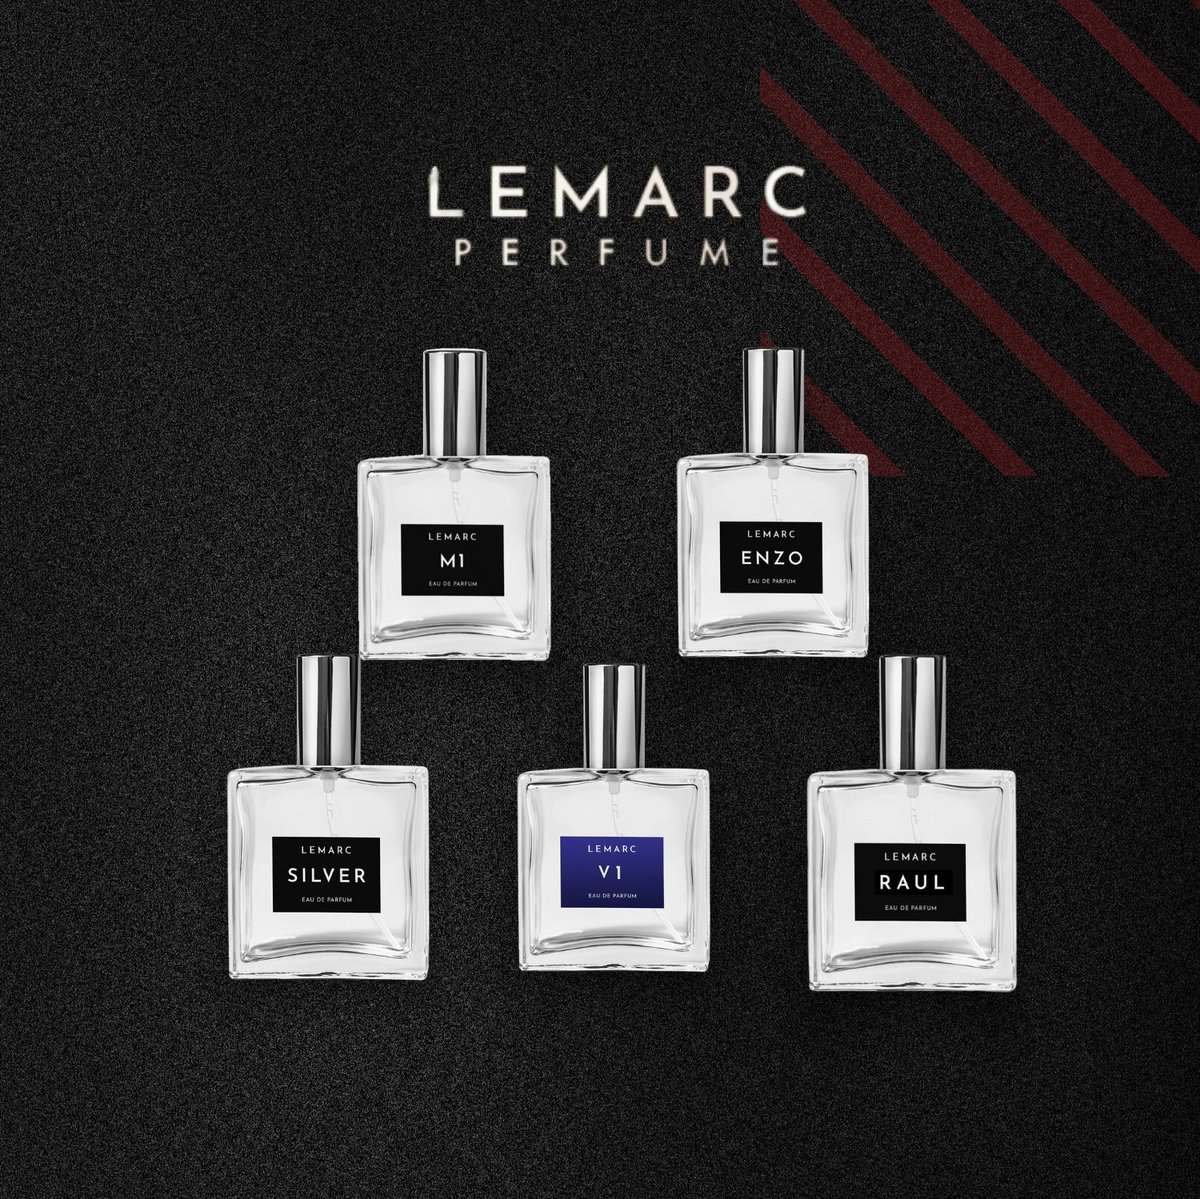 Feel the presence of Lemarc accessories and fragrances. Choose yours at lemarcperfume.com
.
.
.
#perfume #fragrance #perfumecollection #eaudetoilette #eaudeparfum #edp #edt
#mensfashion #menswear #influencerstyle #influencer #lifestyleguide #styleofmen #dresscasual